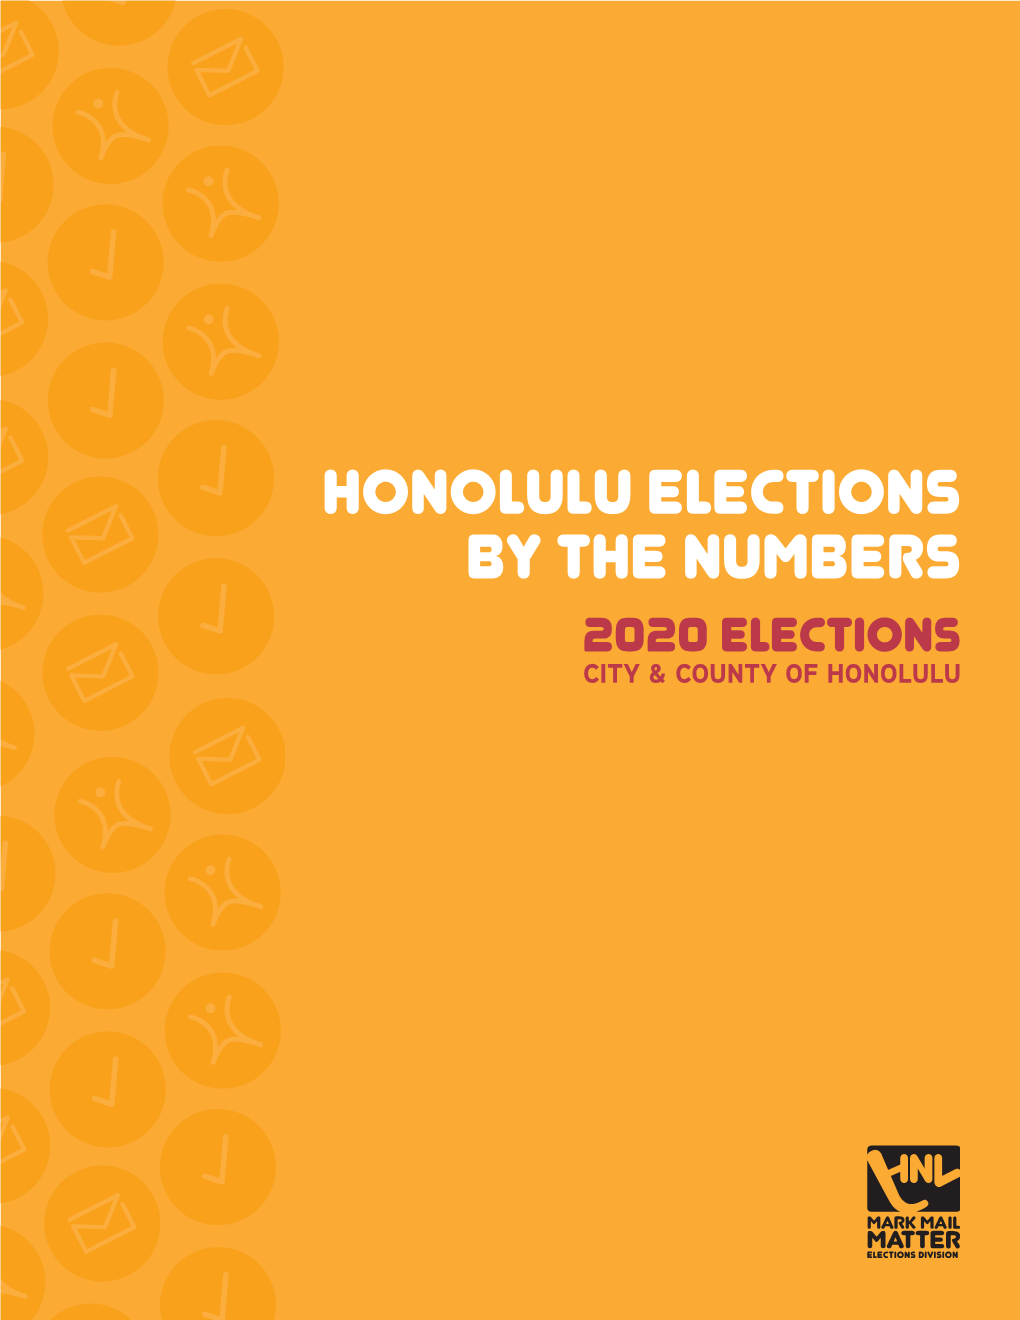 HONOLULU ELECTIONS by the NUMBERS 2020 Elections CITY & COUNTY of HONOLULU Table of Contents